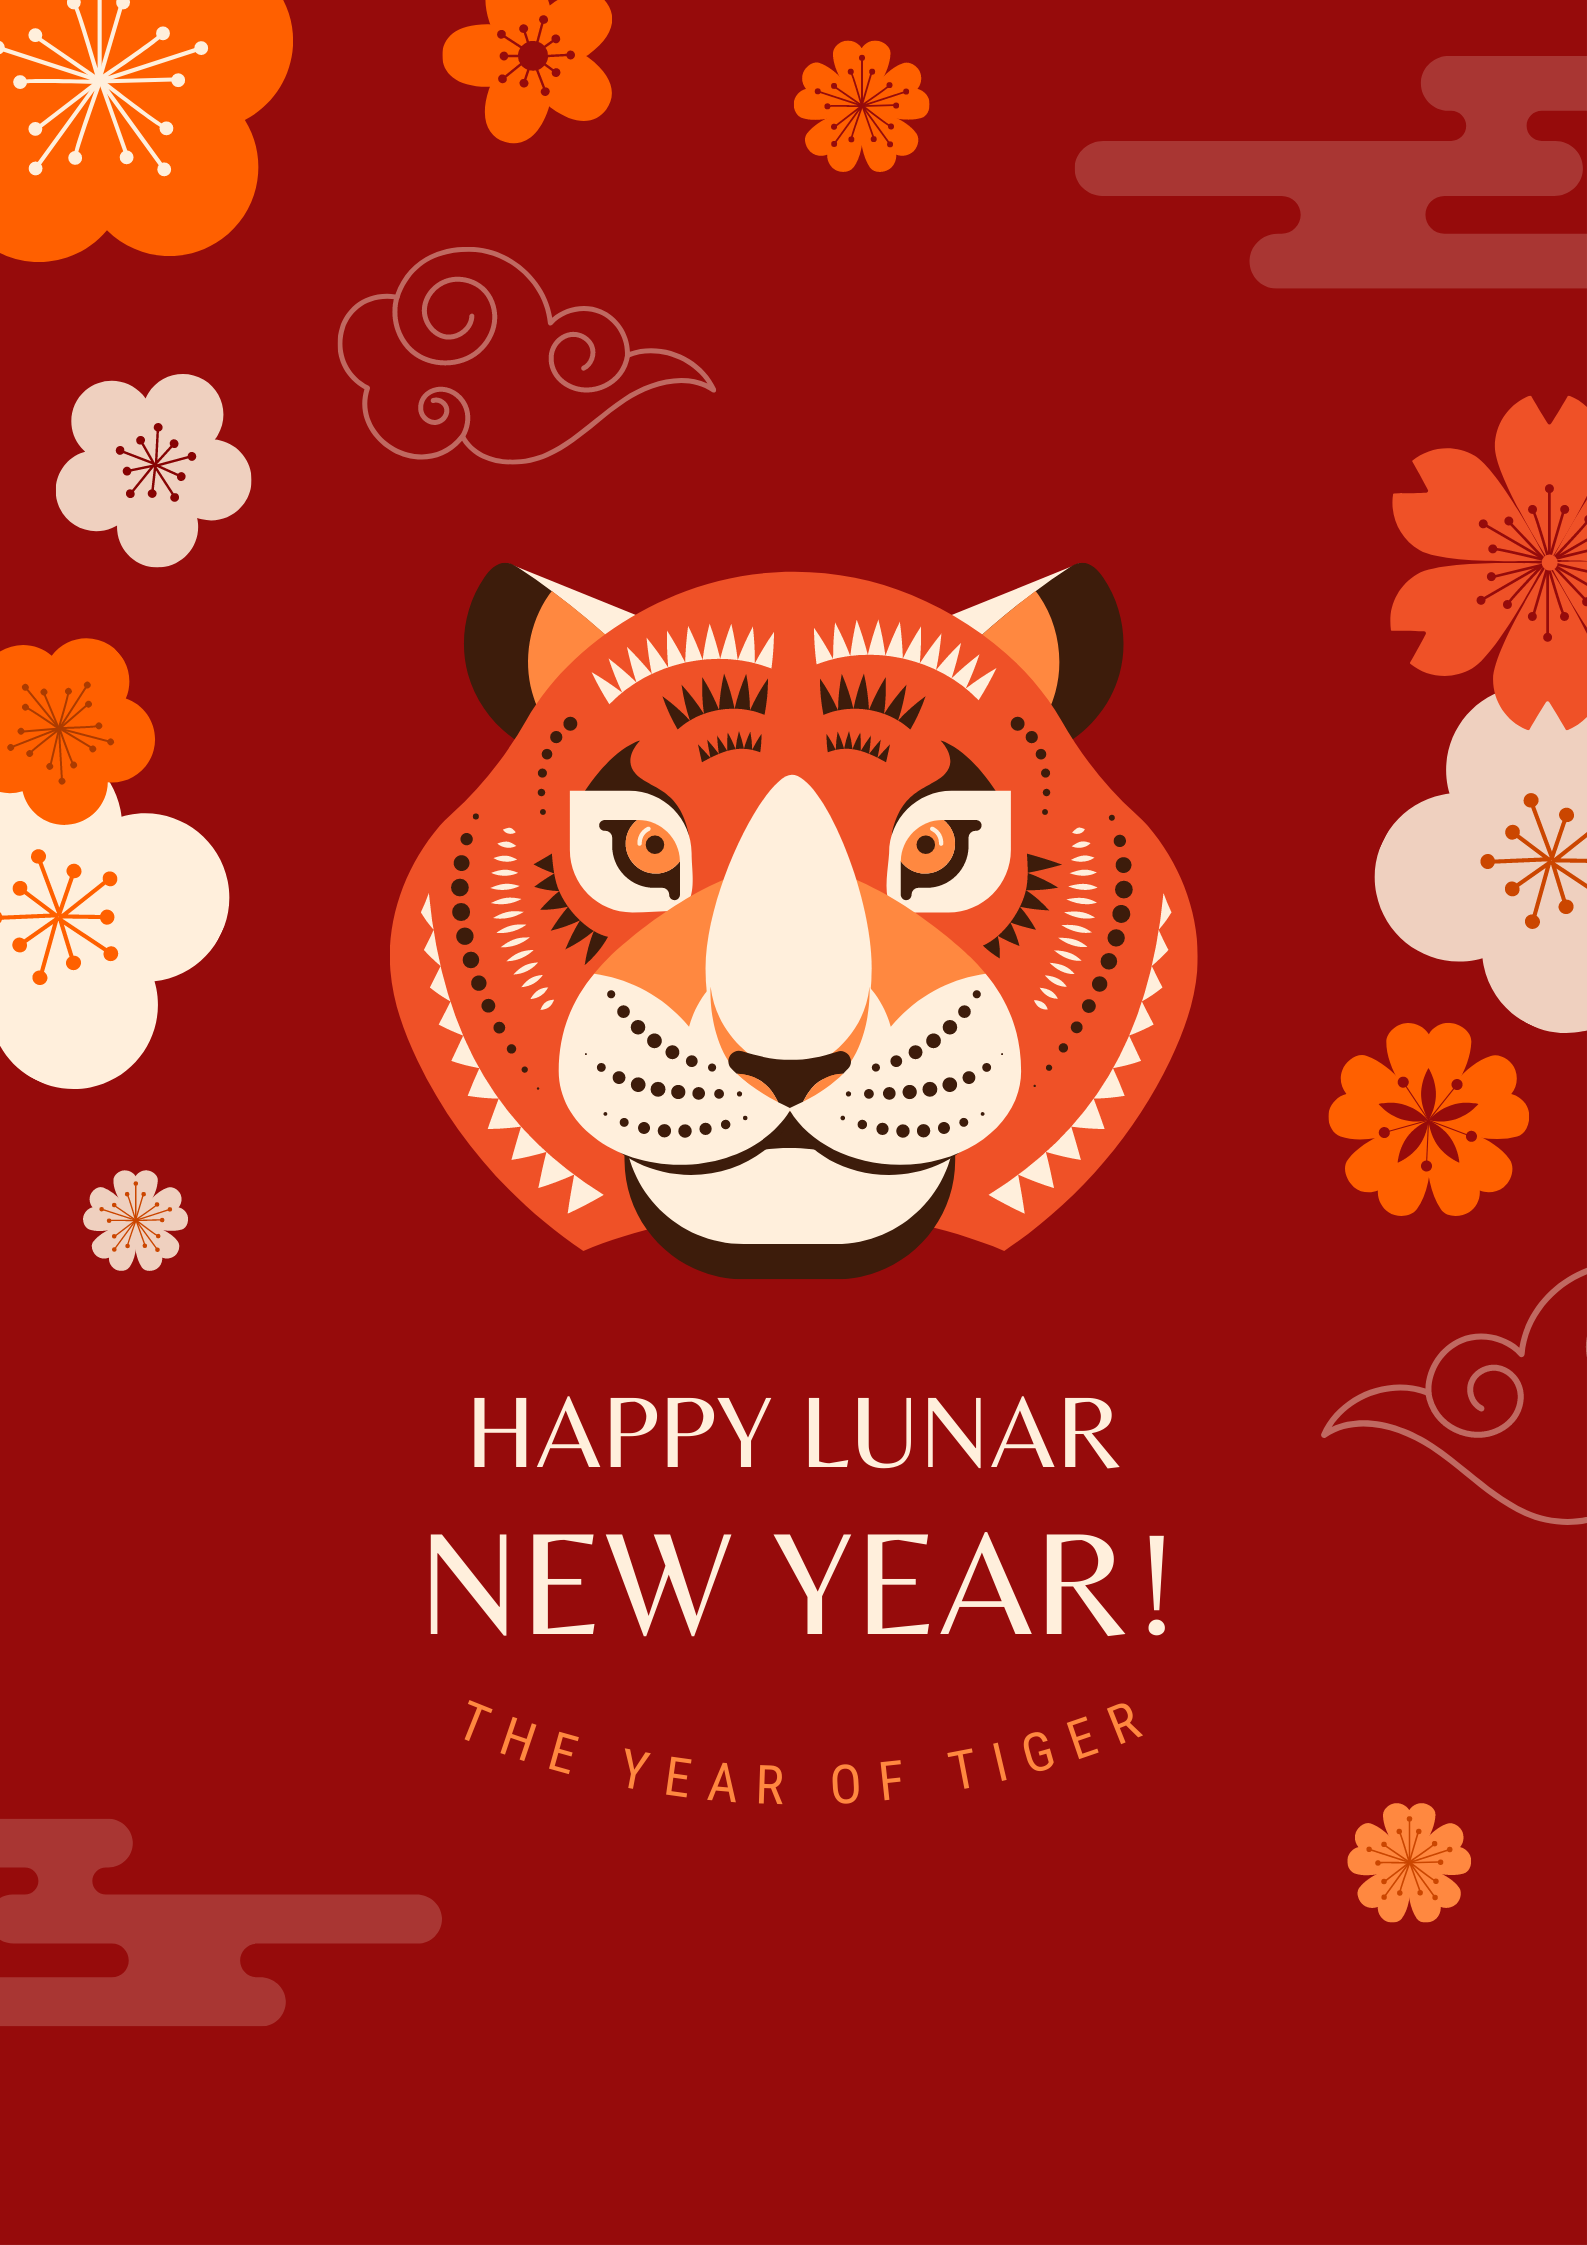 HAPPY LUNAR YEAR OF THE TIGER